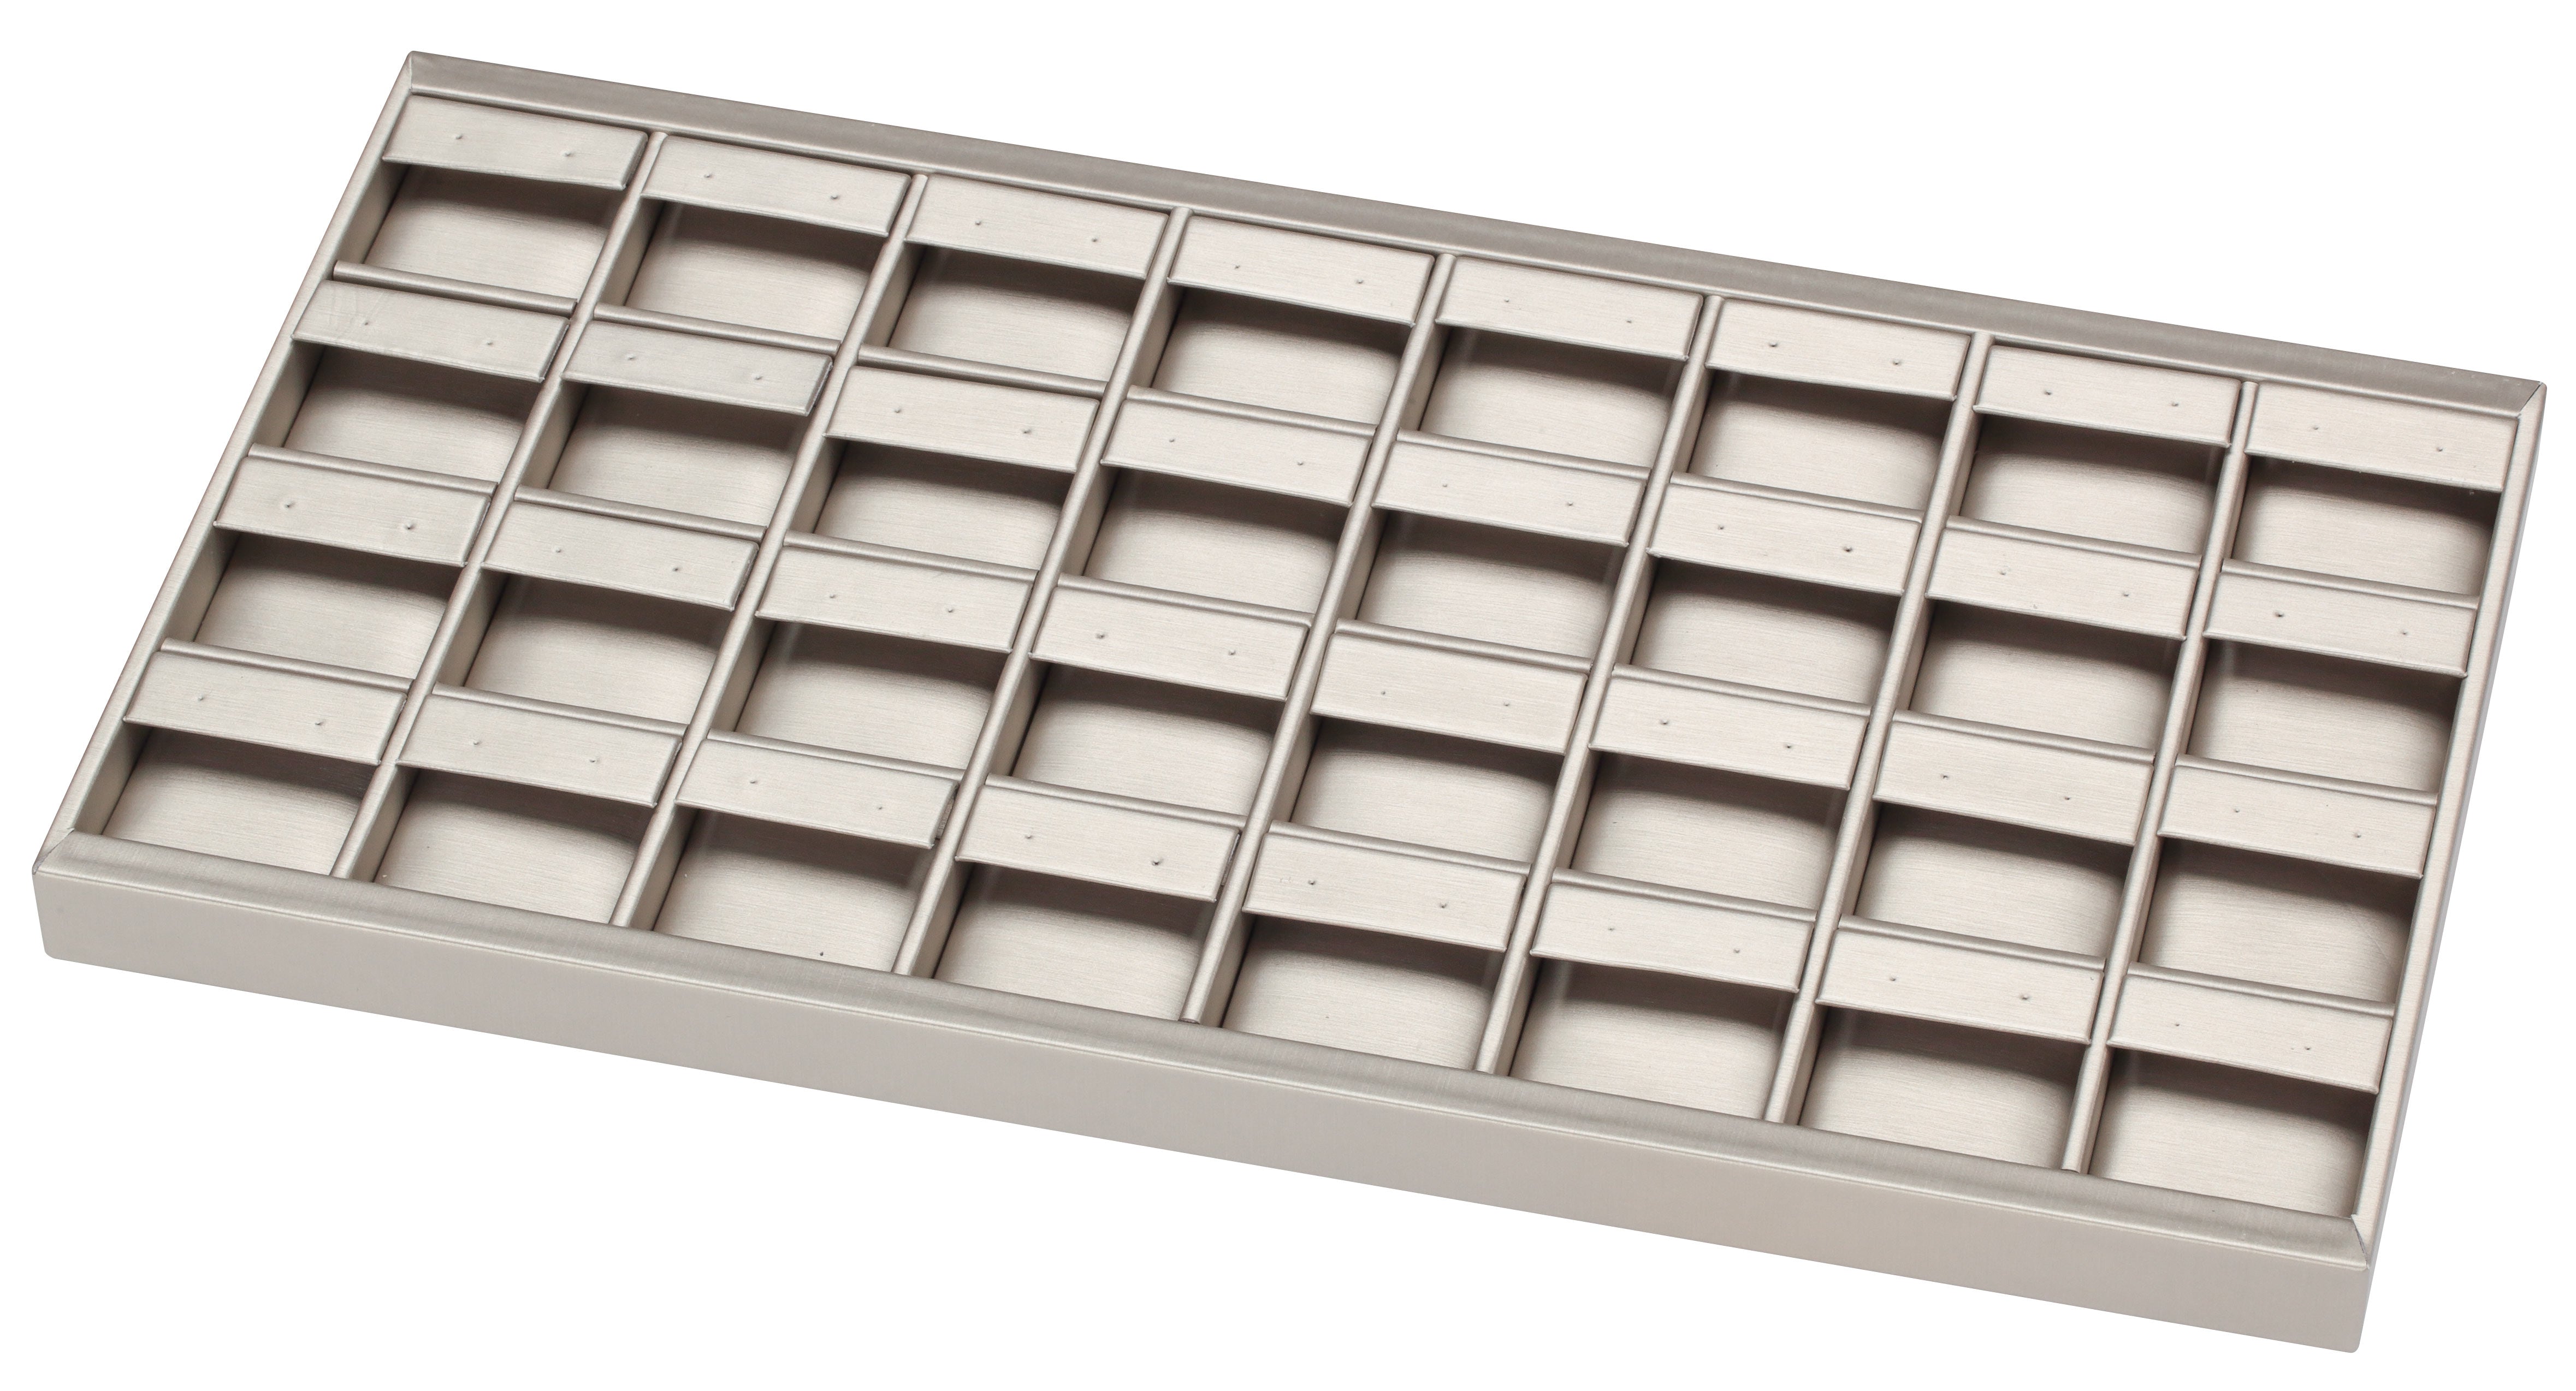 32-Pair Clip Earring Tray, Available in 4 Colors